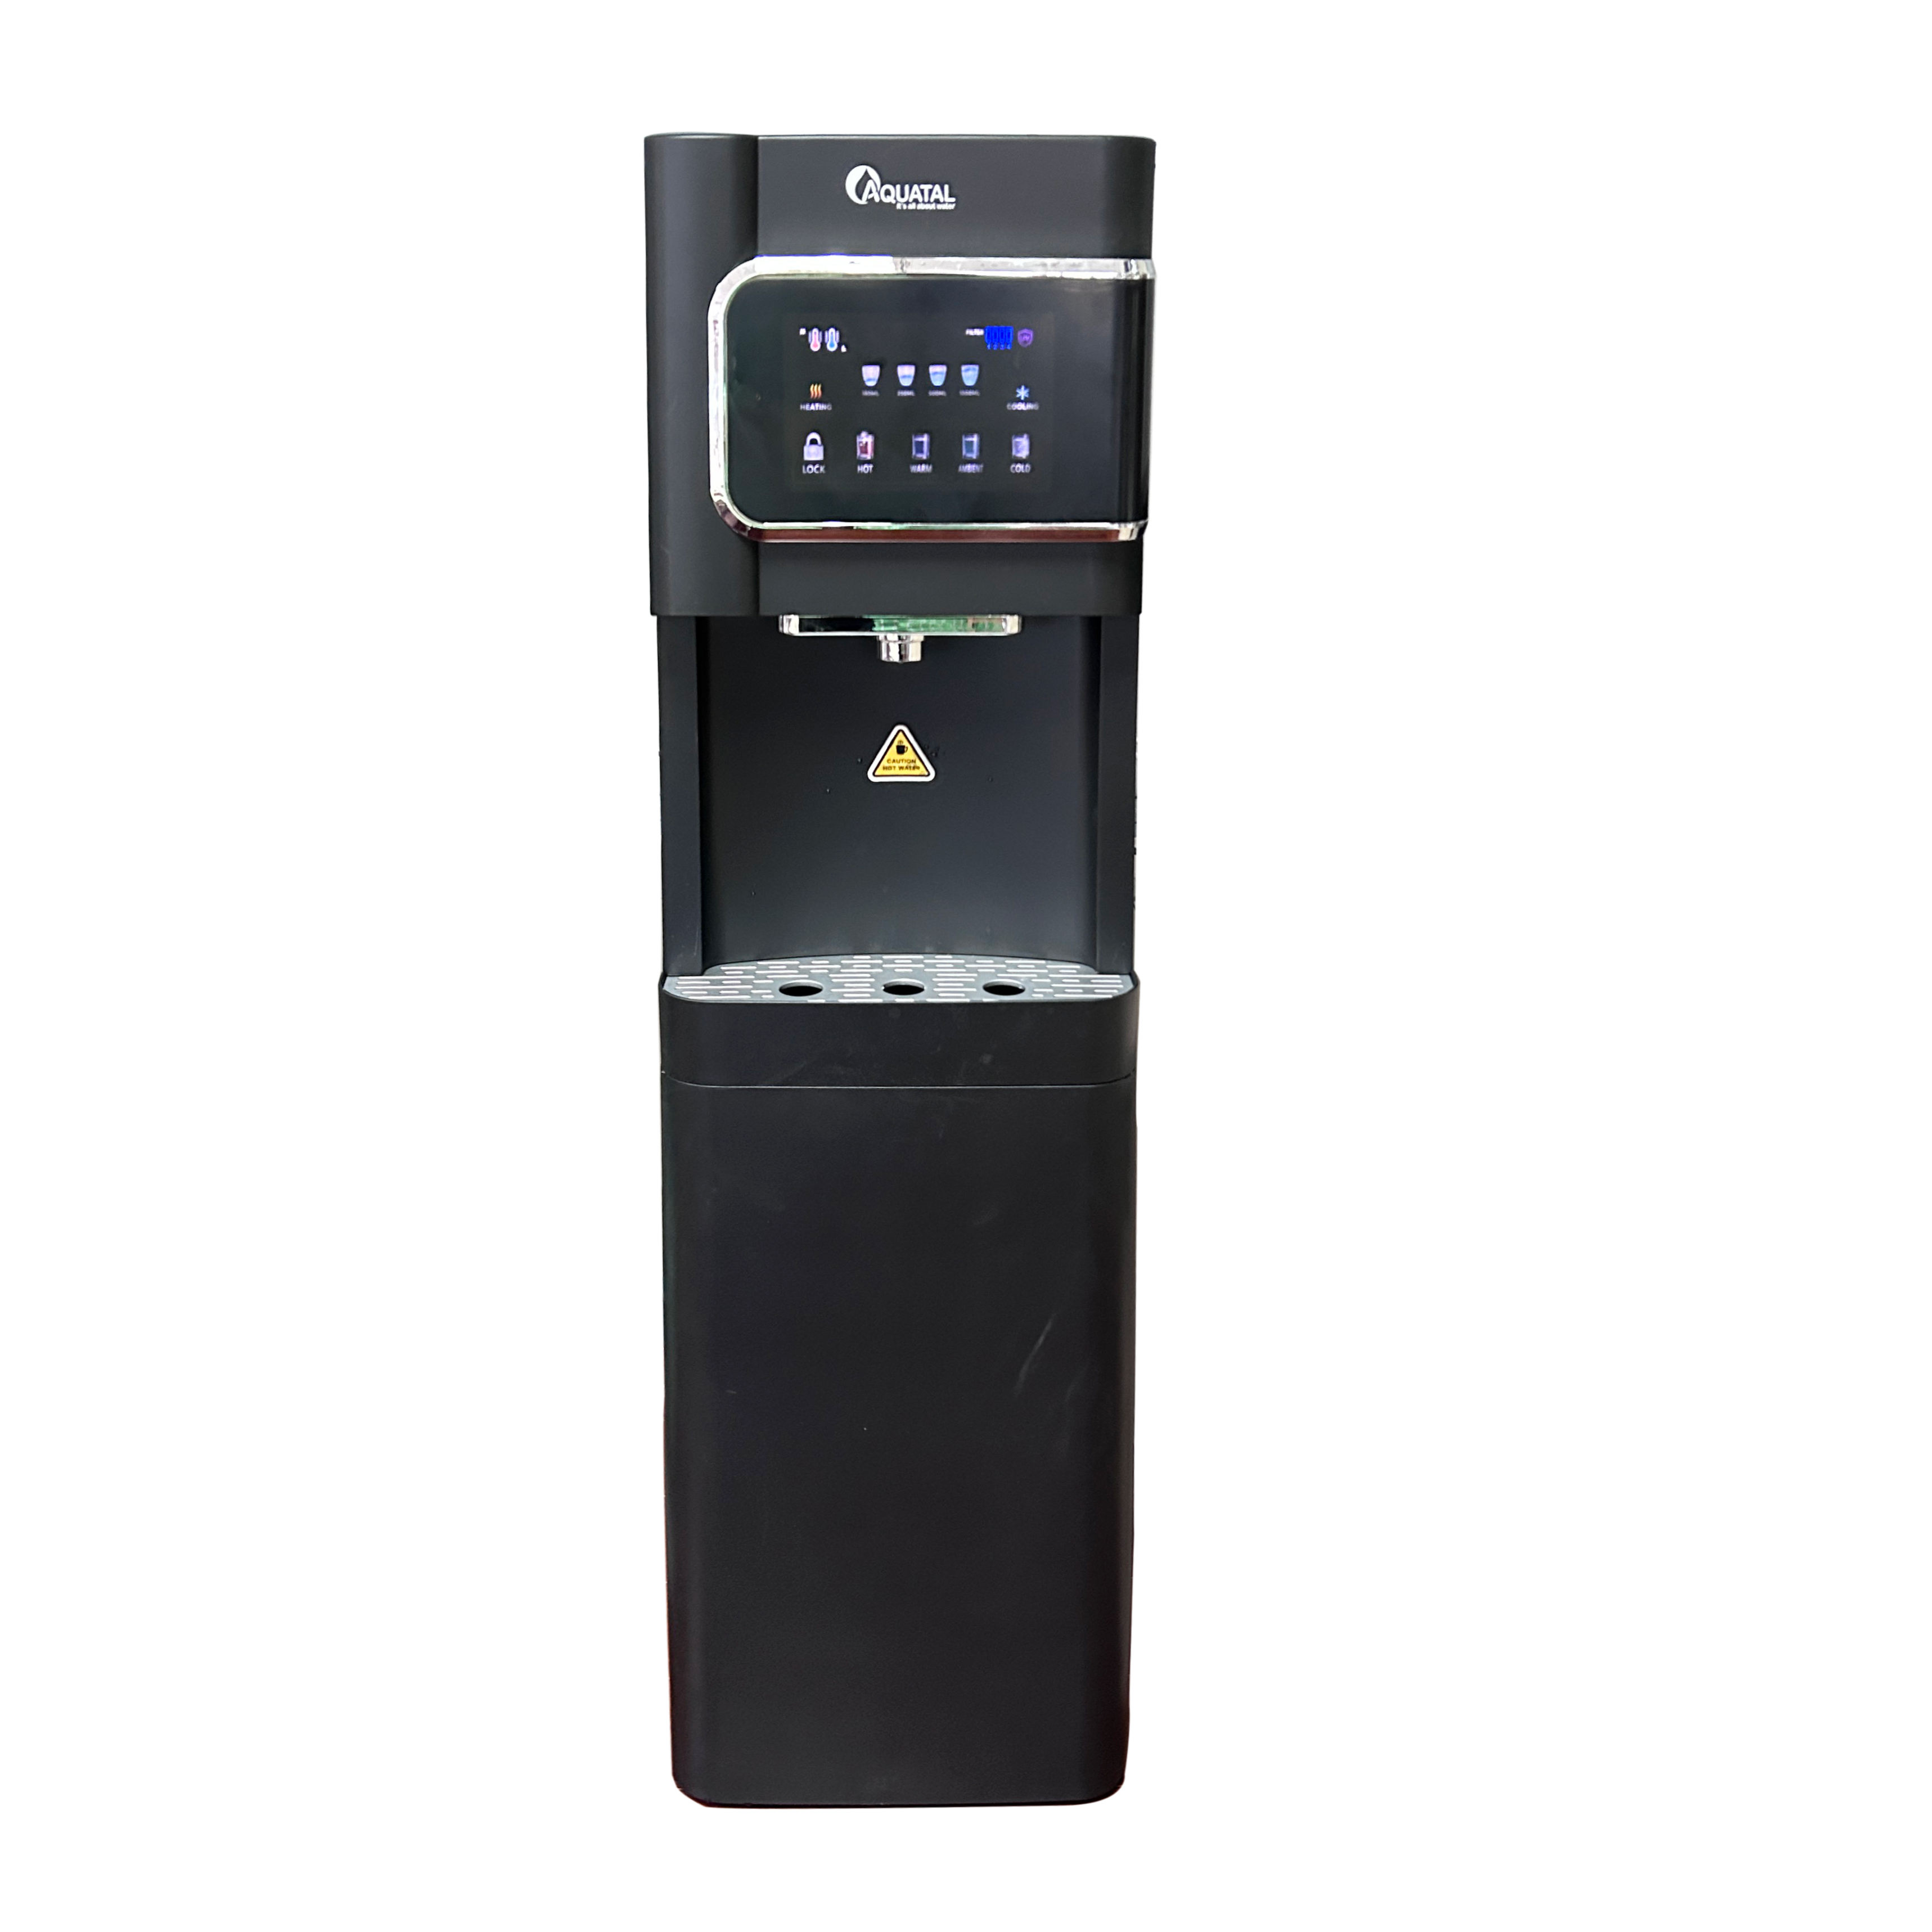 Newest Touched Model Floor Standing Hot And Cold Water Cooler With RO/UF System Water Purifier